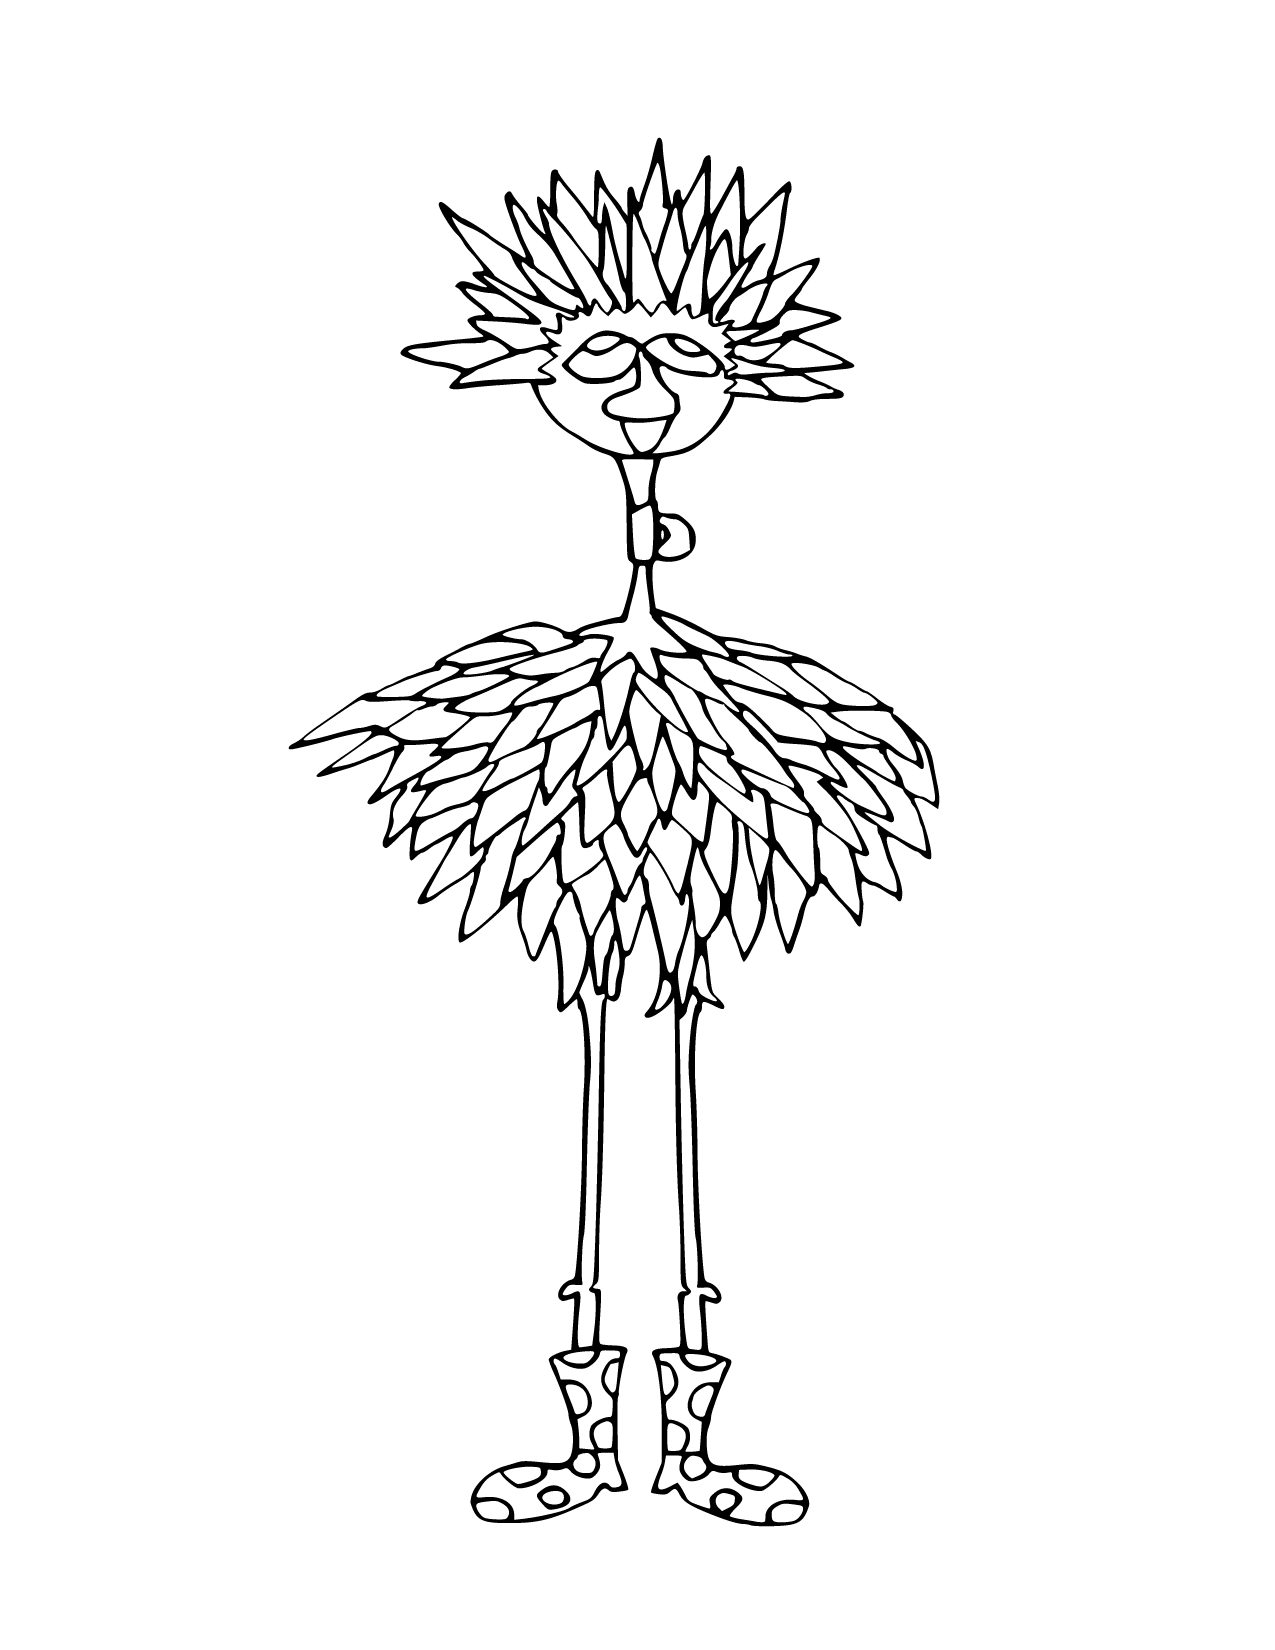 Funny Bird With Weird Feathers Coloring Page